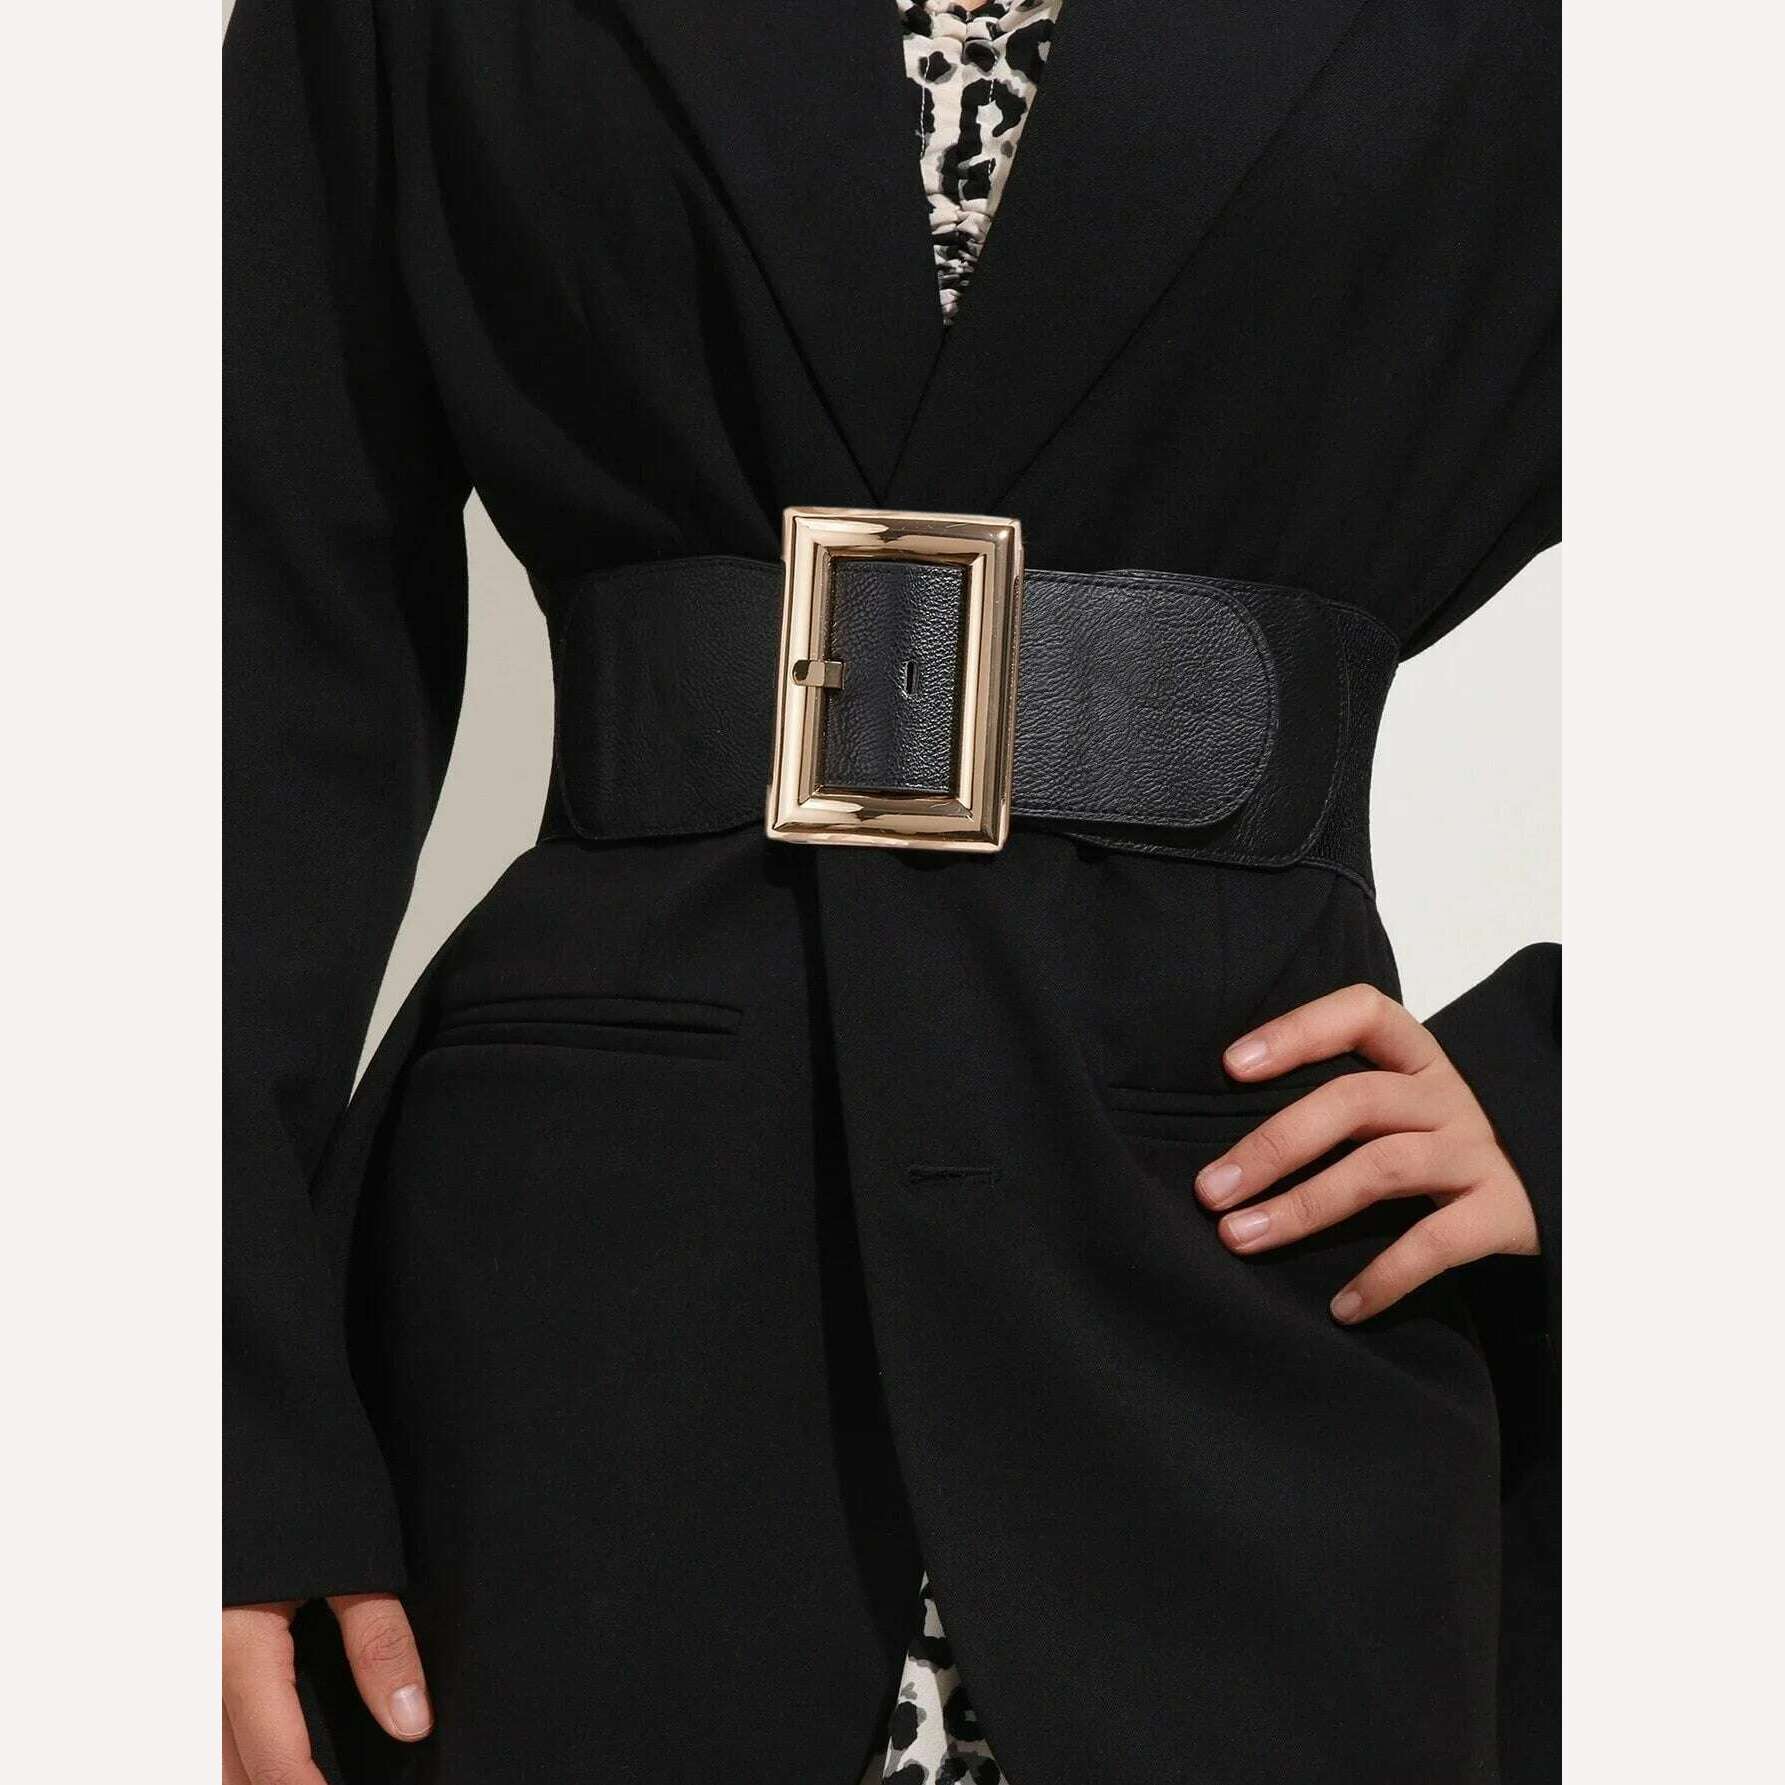 KIMLUD, Wide Square Buckle Women's Elastic Waist Belt To Match Loose Fit Dresses, Coats, Sweaters, Trousers, Skirts, KIMLUD Womens Clothes